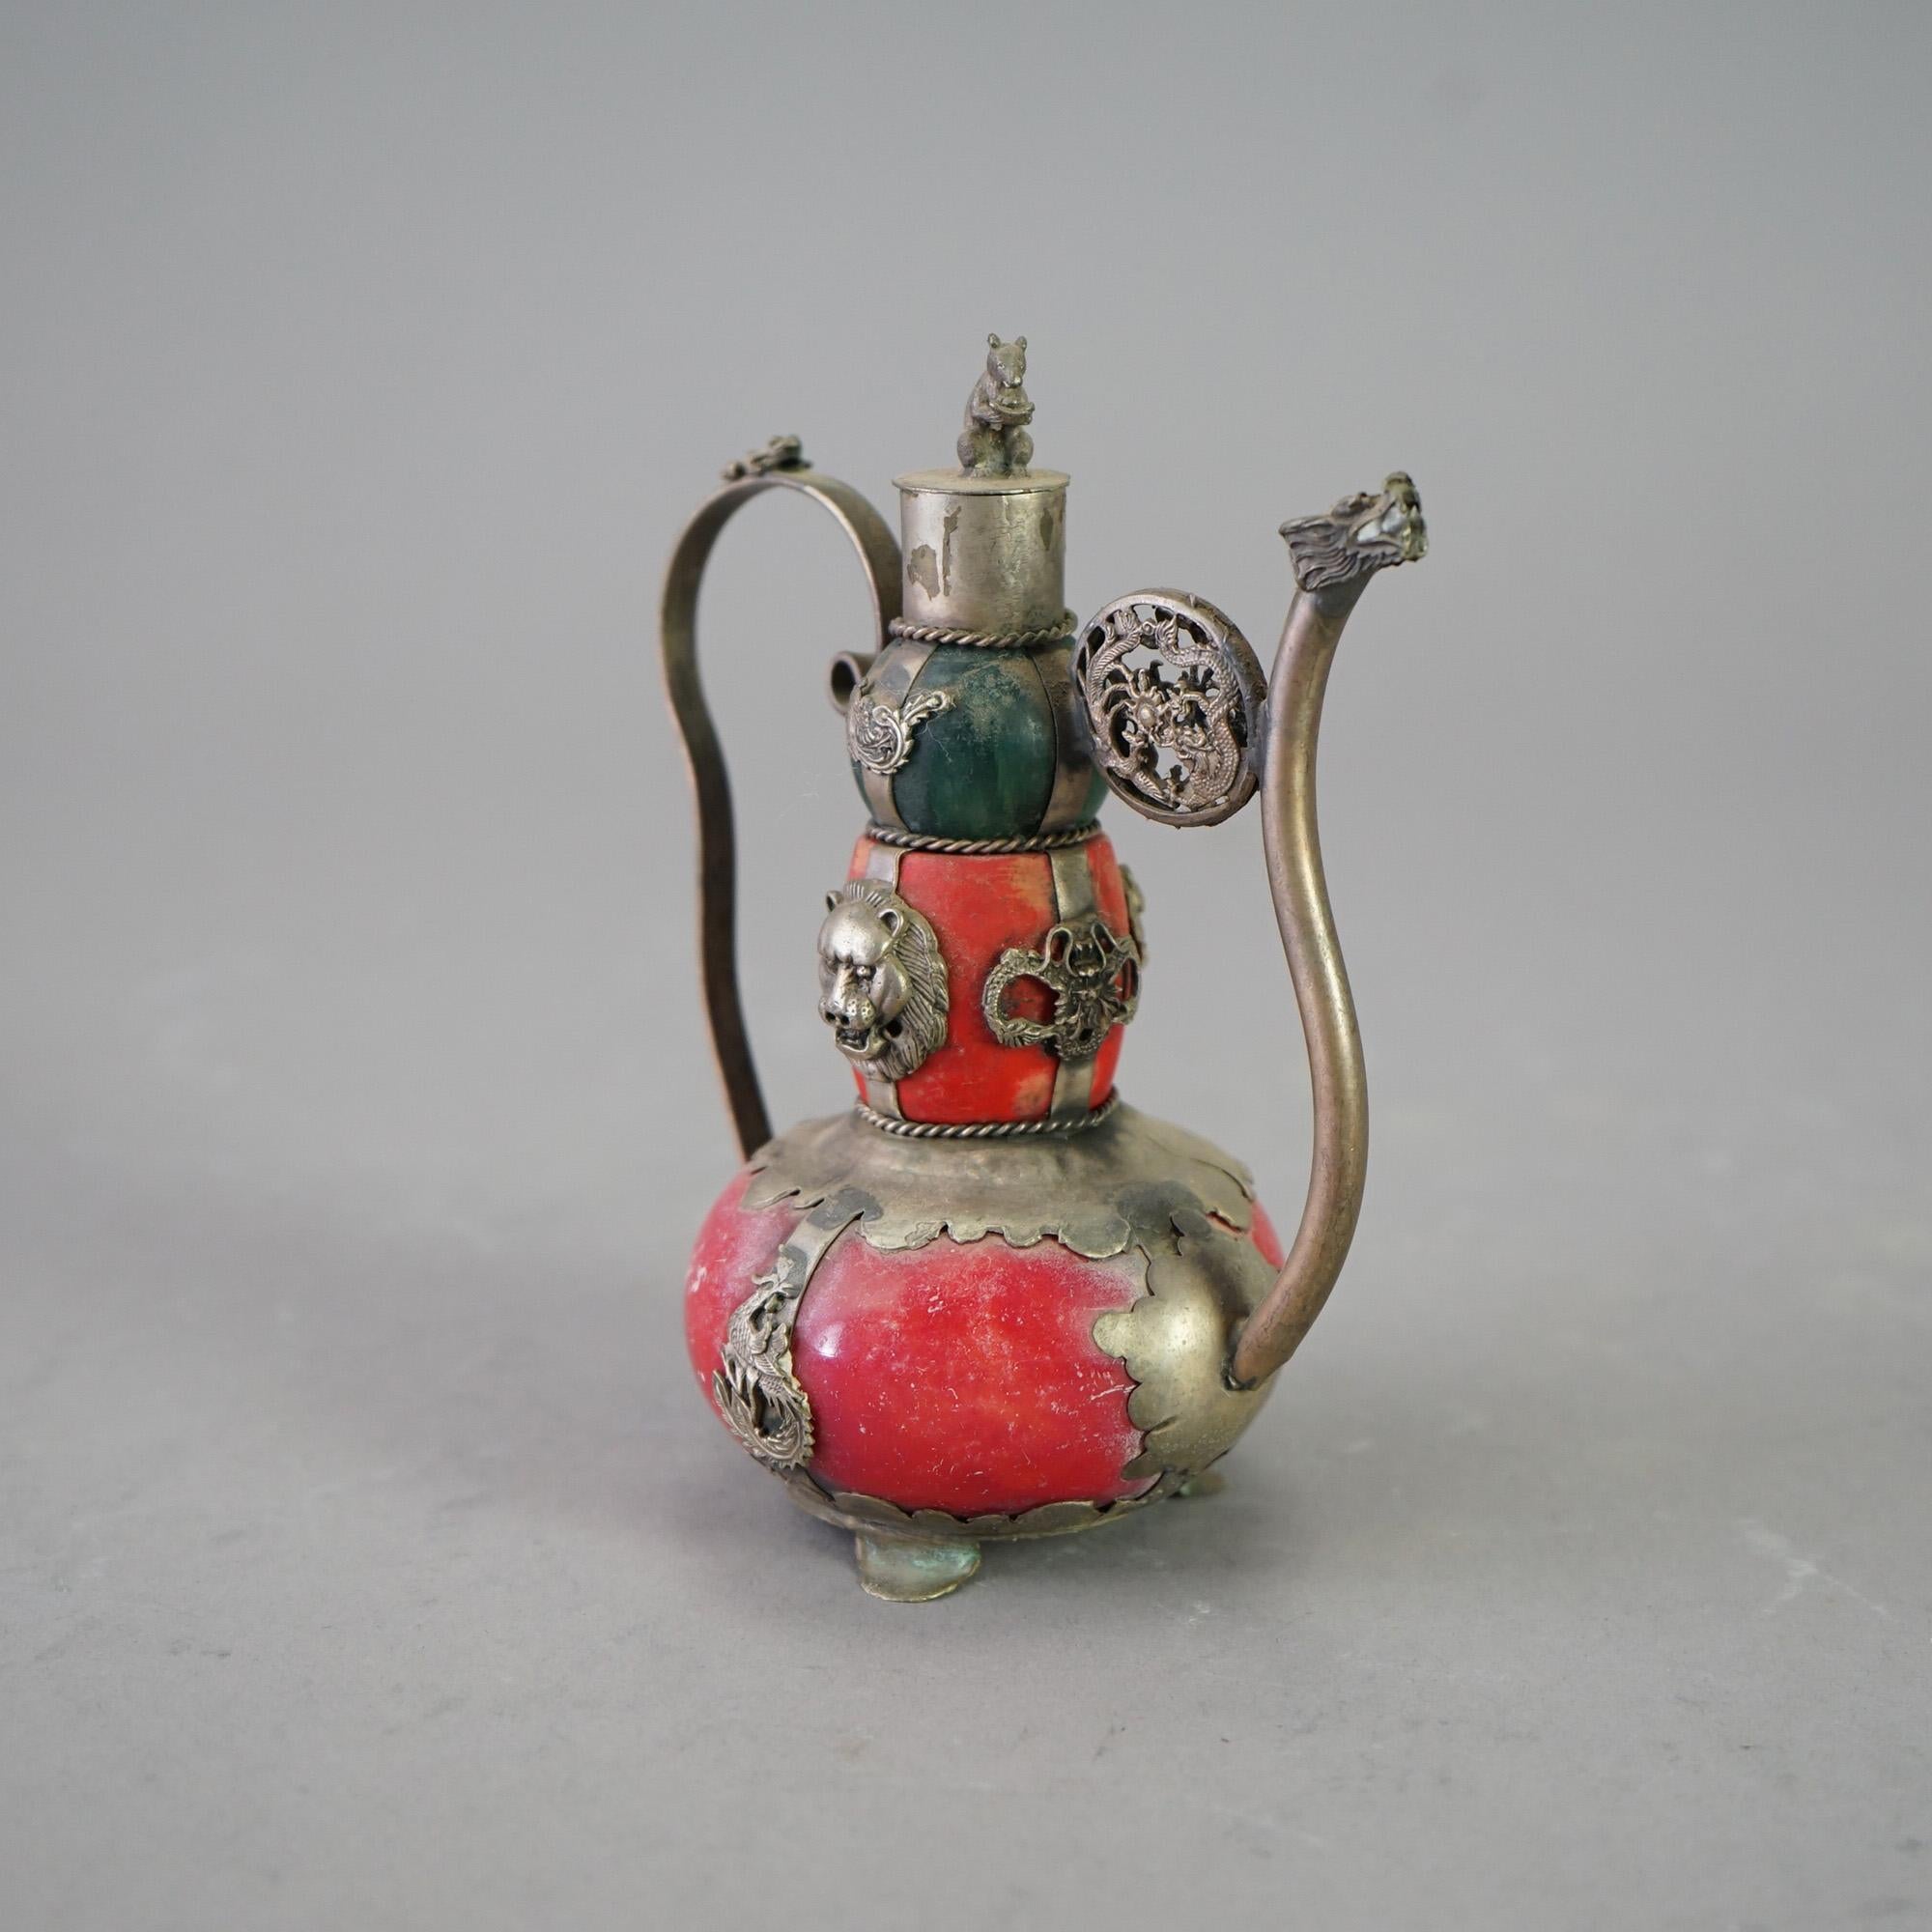 A miniature Chinese teapot offers porcelain vessel in double gourd form with silver overlay with dragons, frogs, and lions, stamped as photographed, 20th century

Measures- 5.5''H x 3''W x 4.5''D